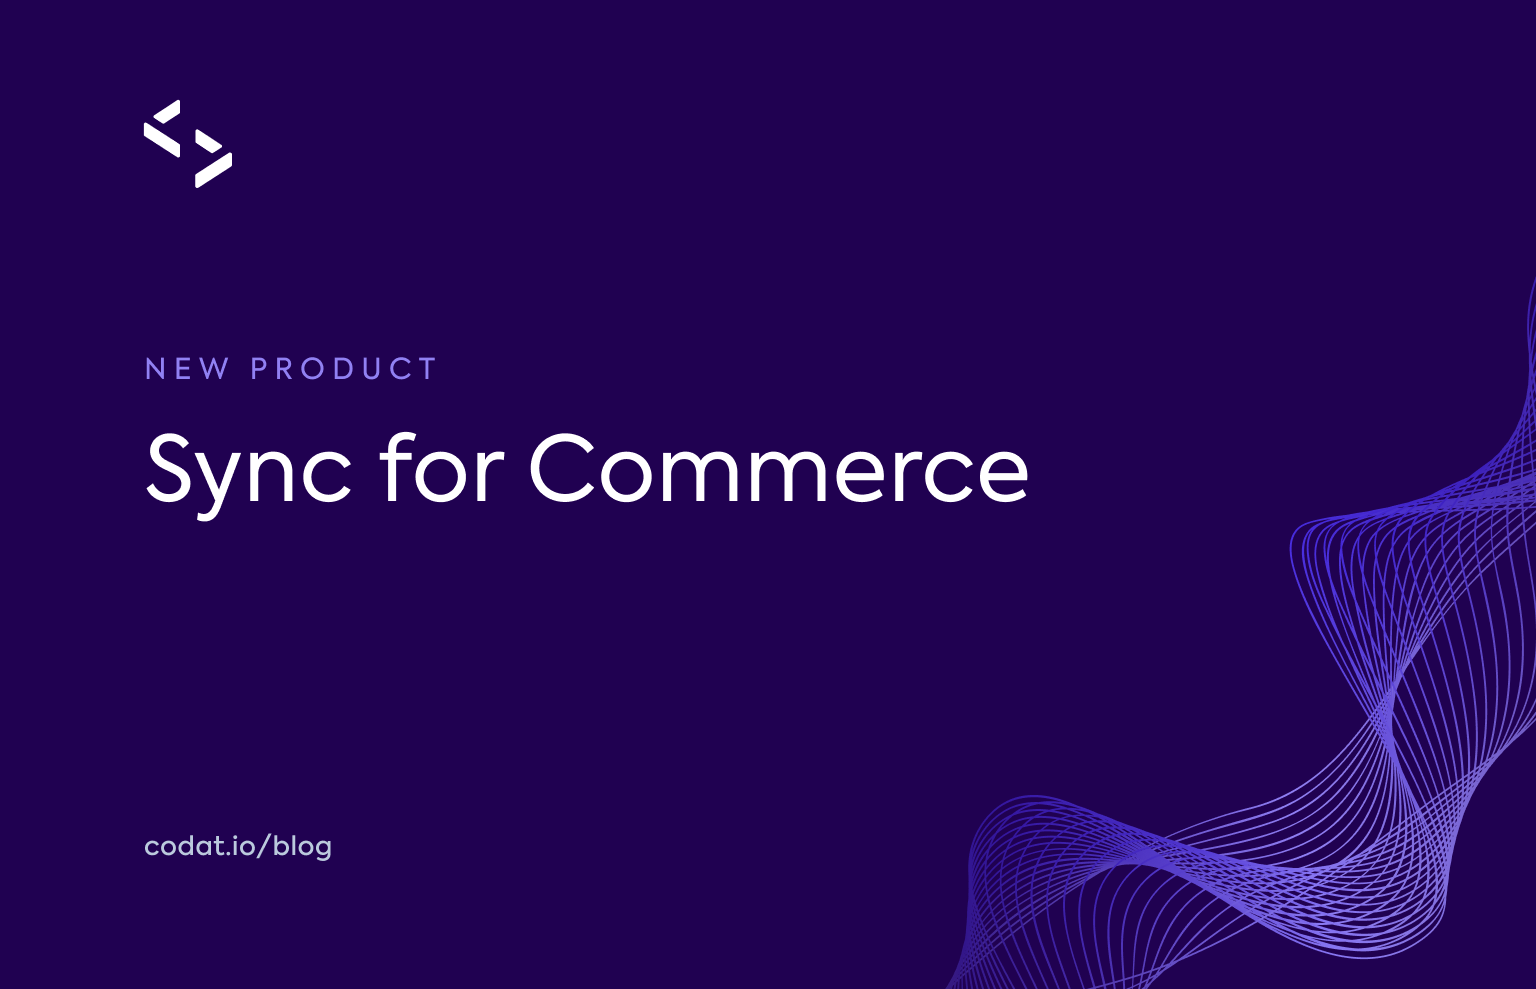 Sync for Commerce